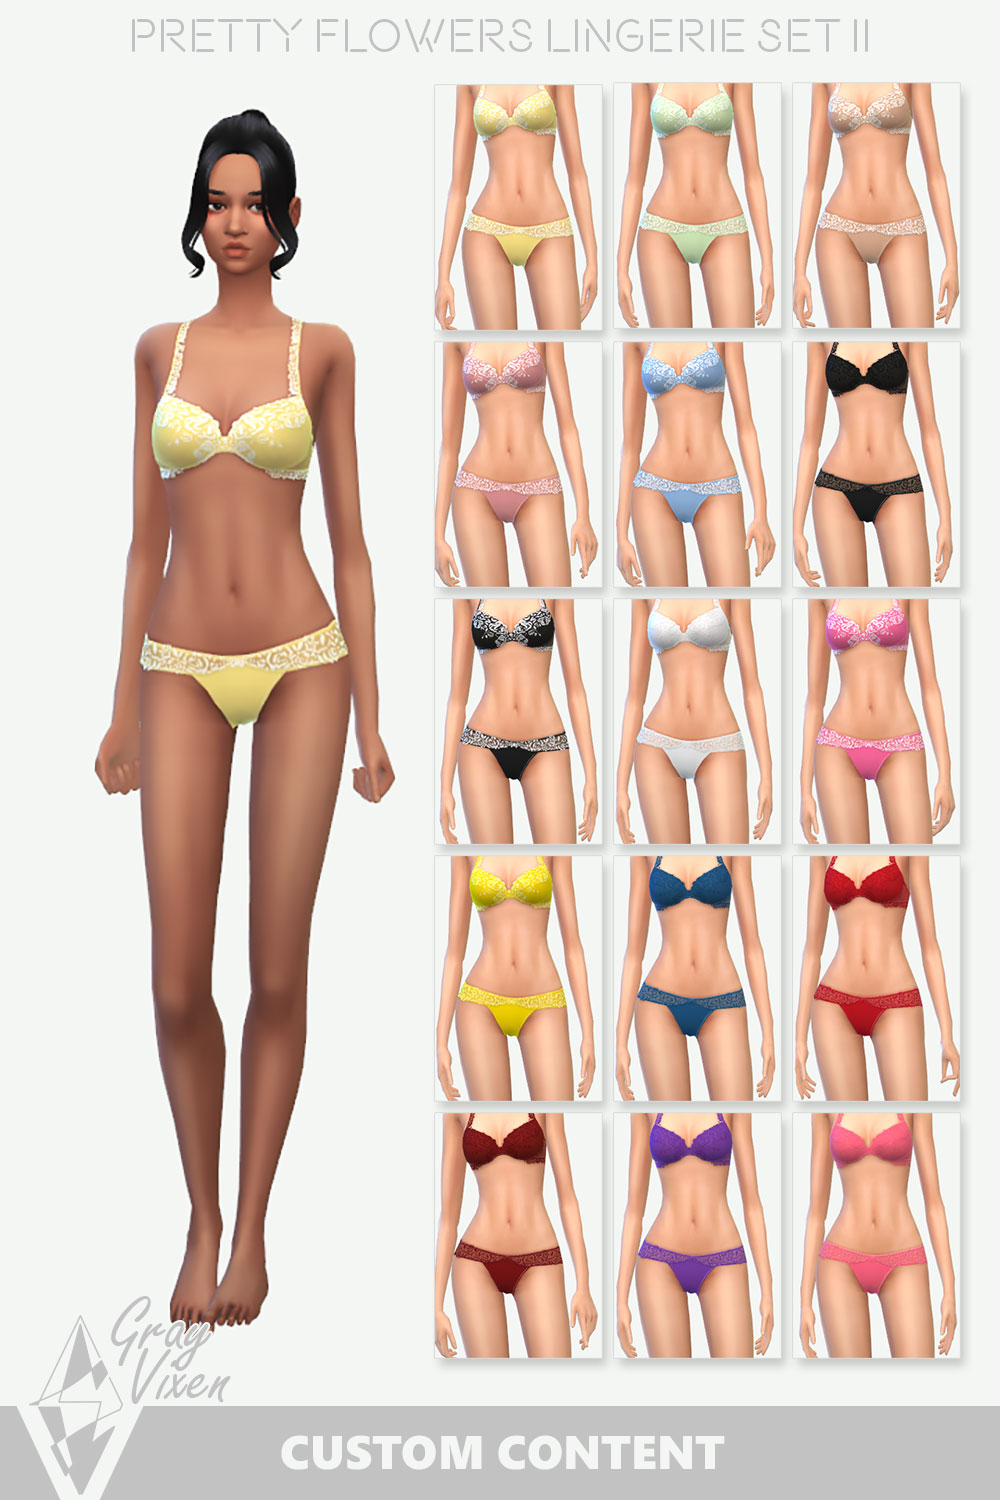 The Sims 4 Lingerie CC Swatches